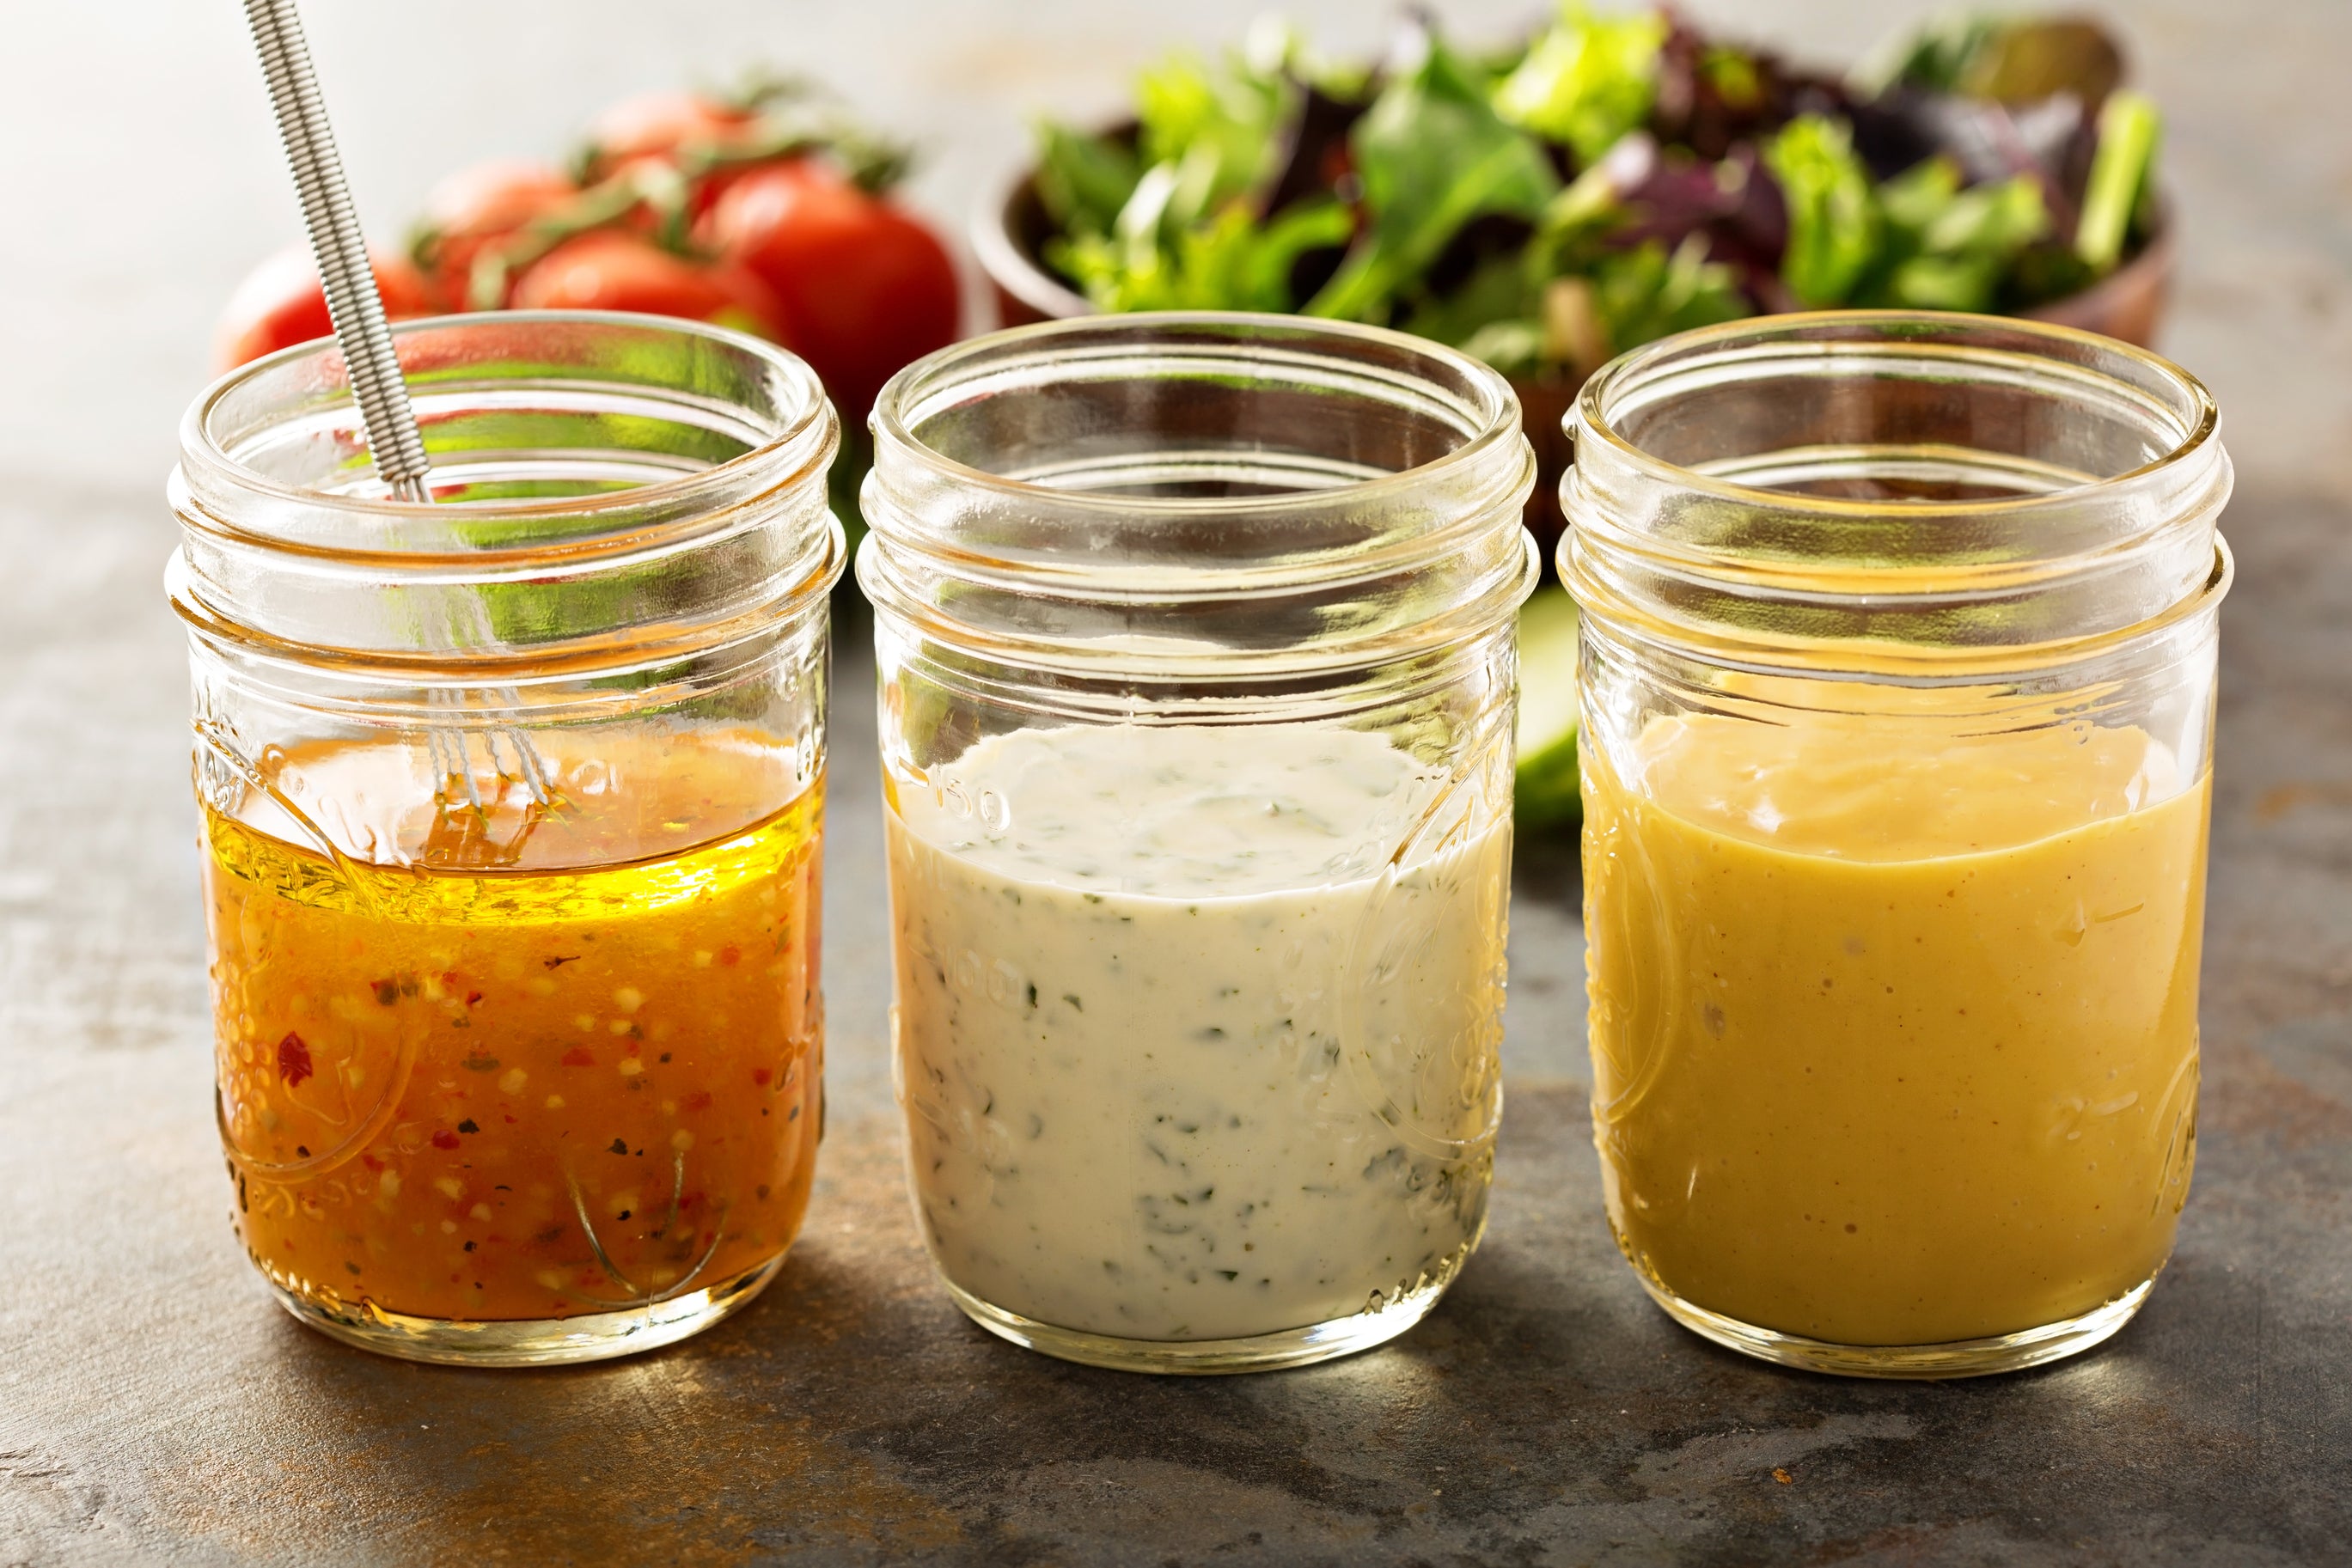 Different types of salad dressing stored in old baby food jars. Baby food jars can be upcycled and be used to store a number of items.